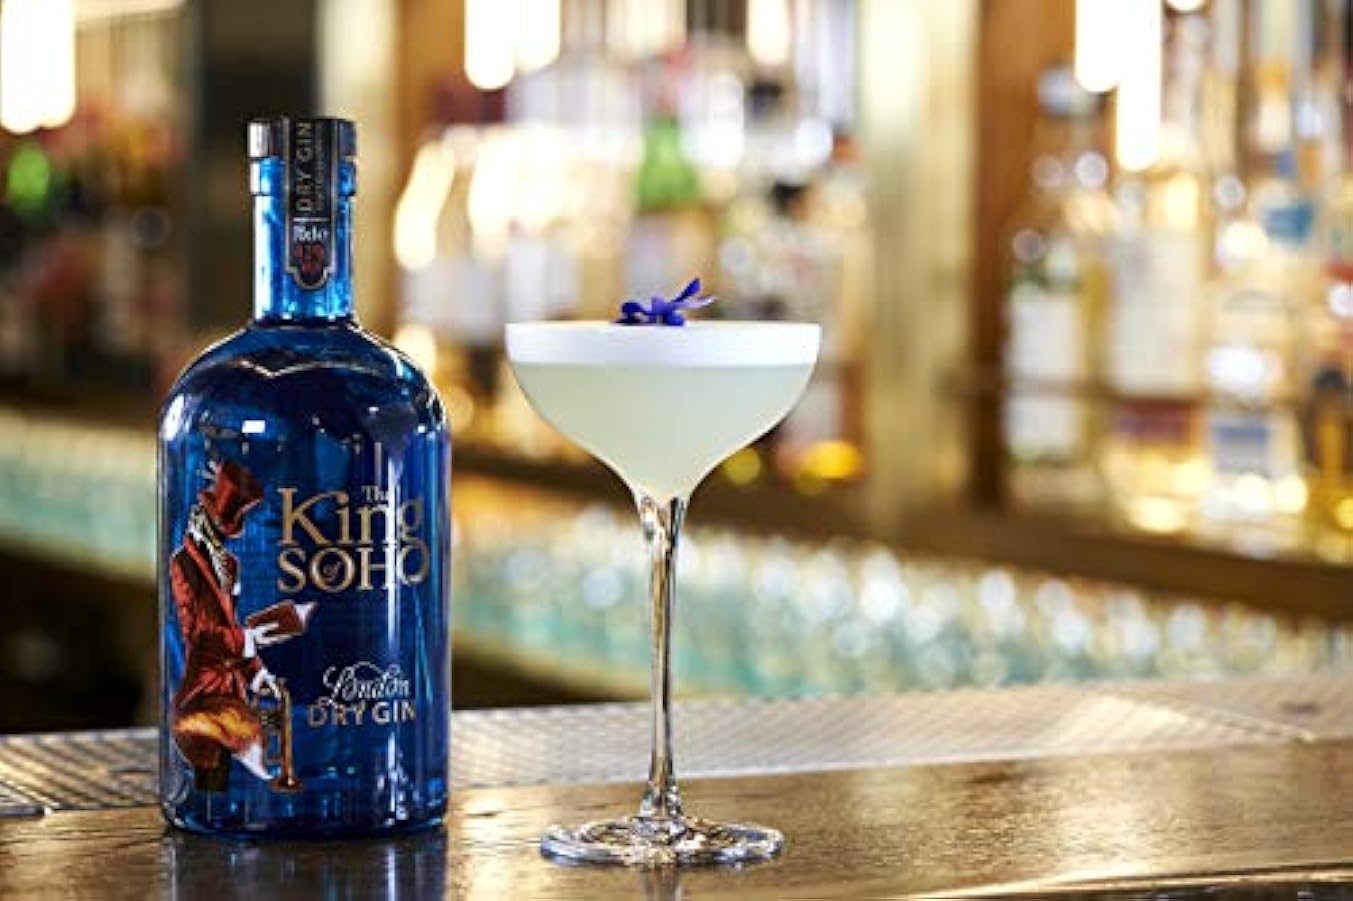 West End Drinks Re di Soho Gin - 700 ml 950453902